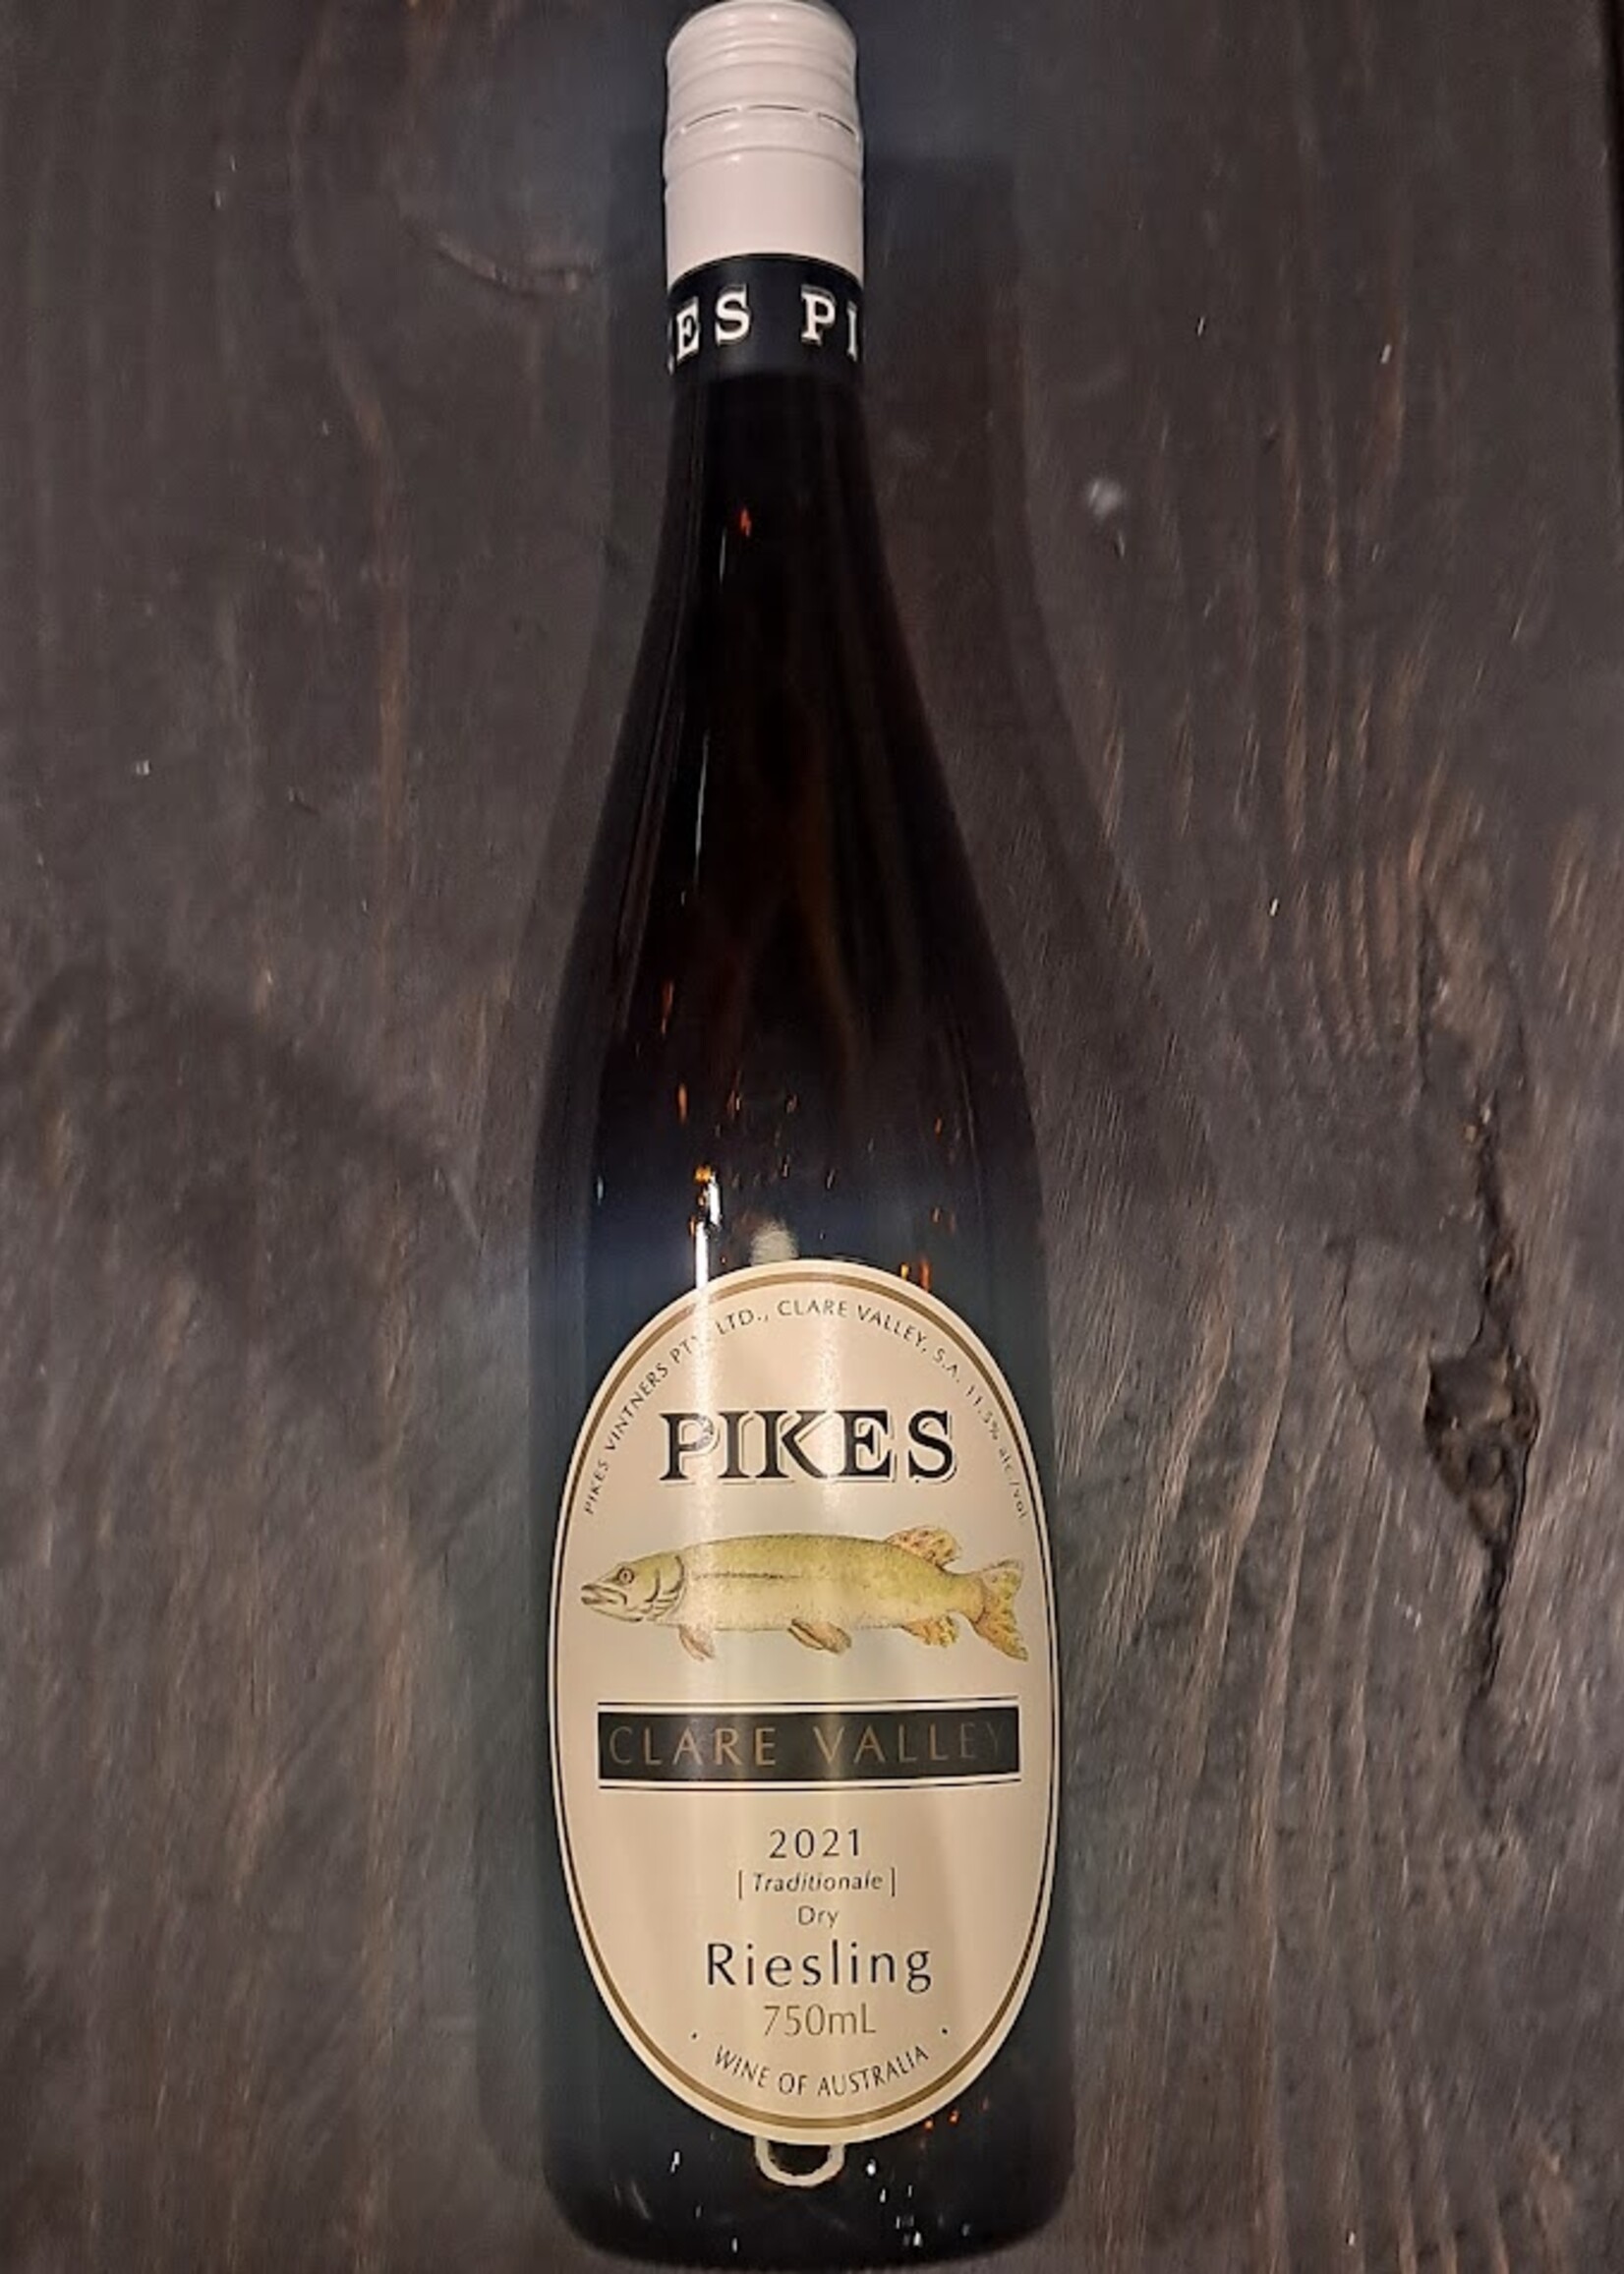 Pikes Clare Valley Riesling Traditionale 2021